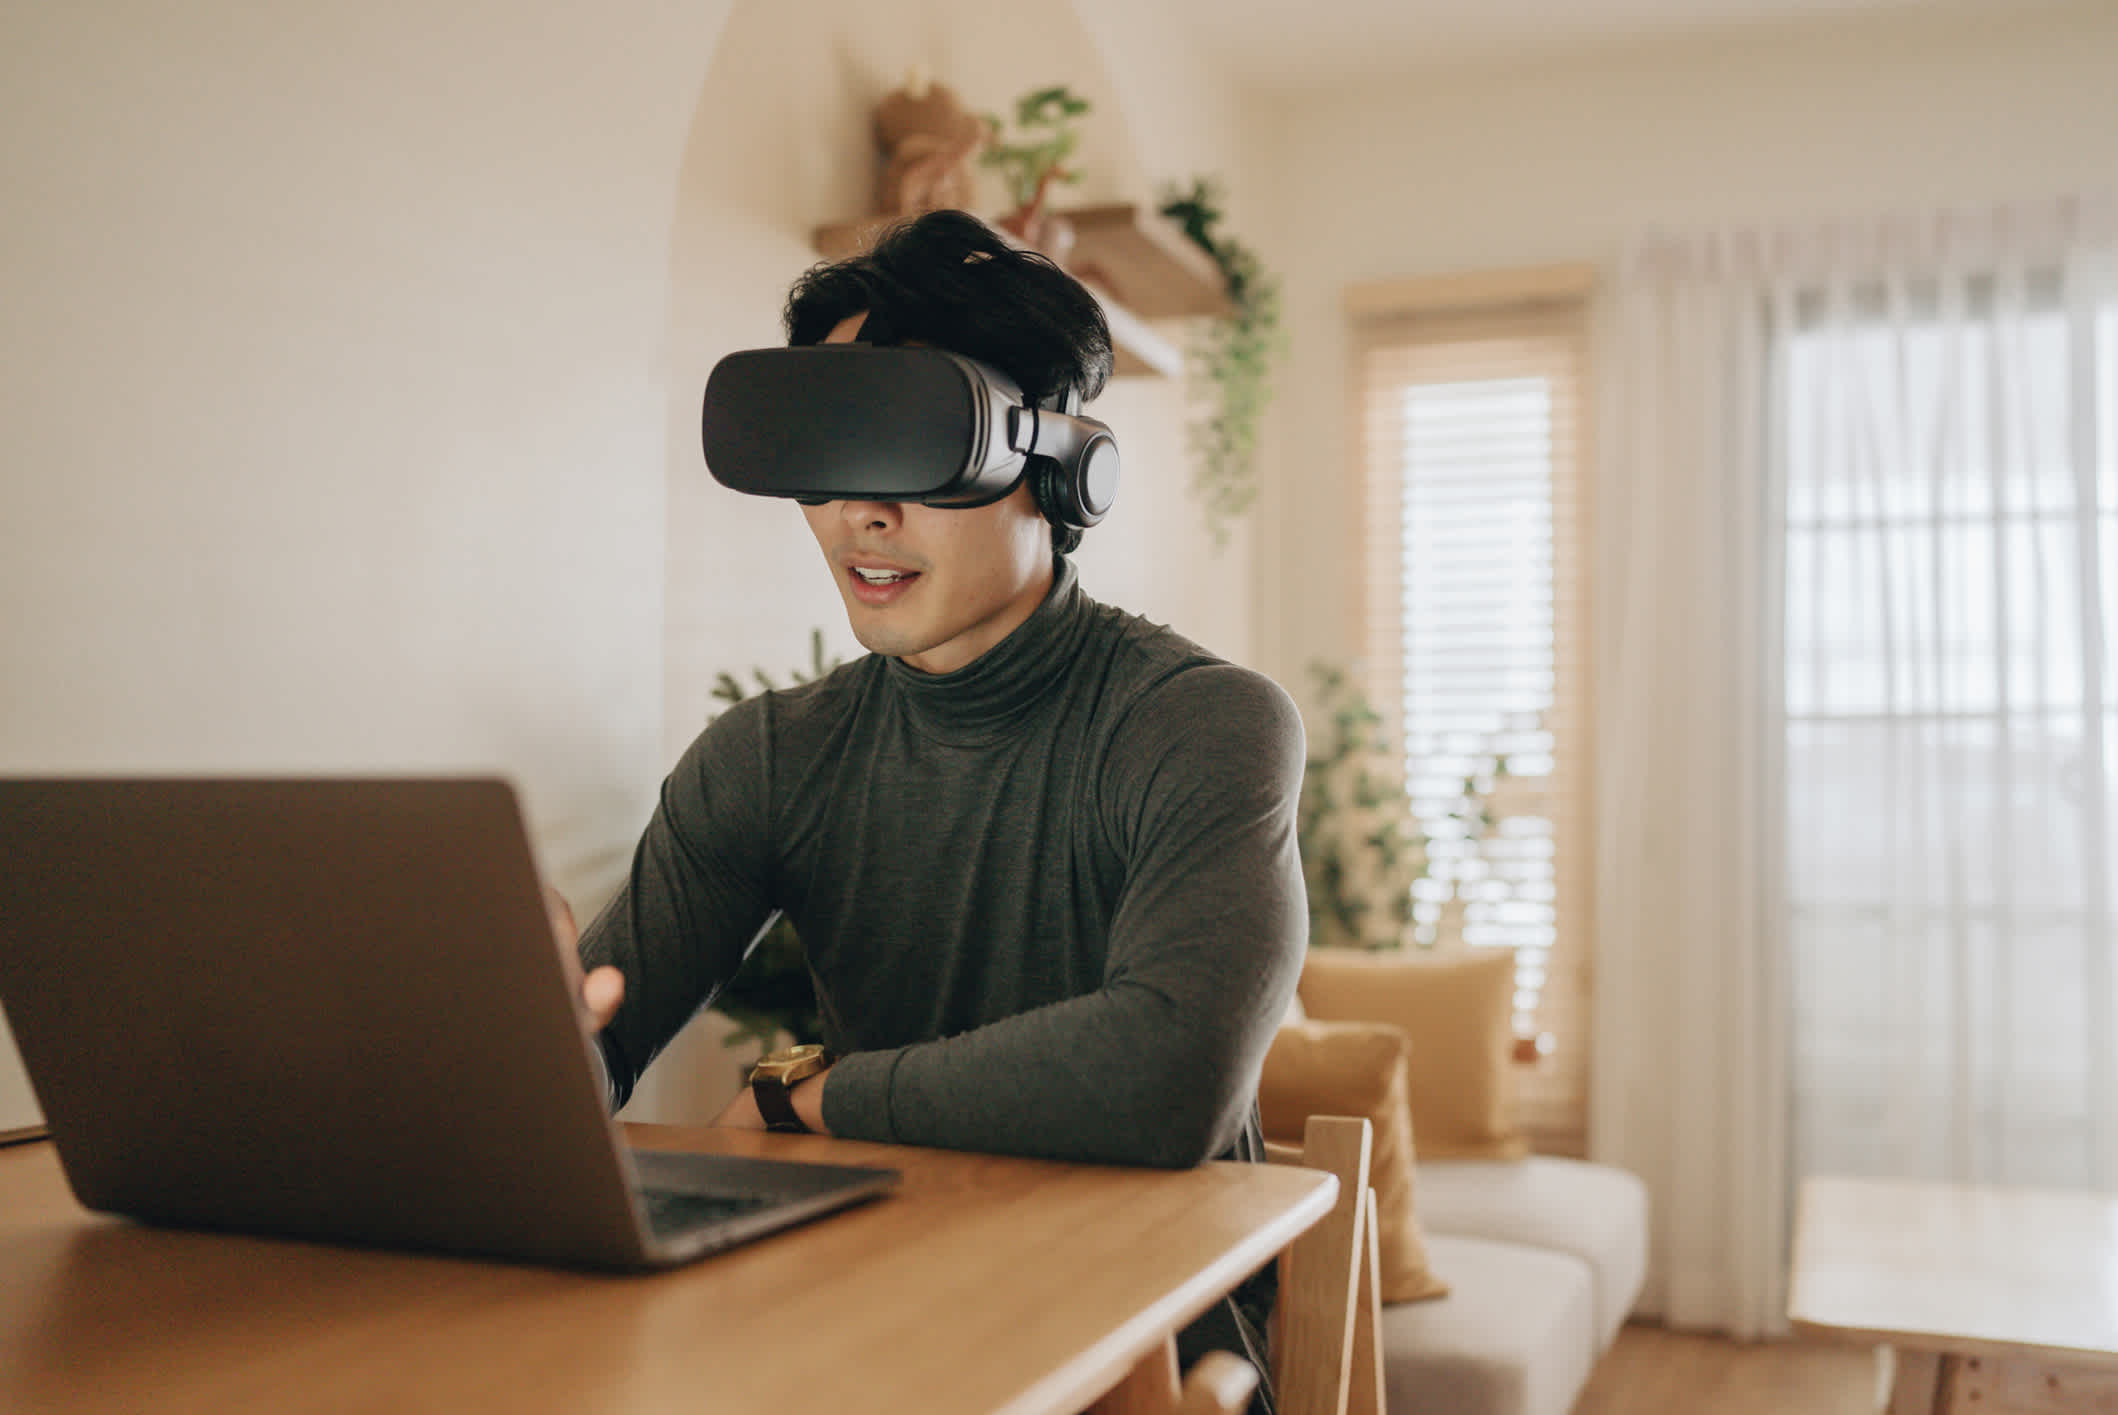 Young asian man enjoy playing virtual reality simulator for relaxation in living room at home

